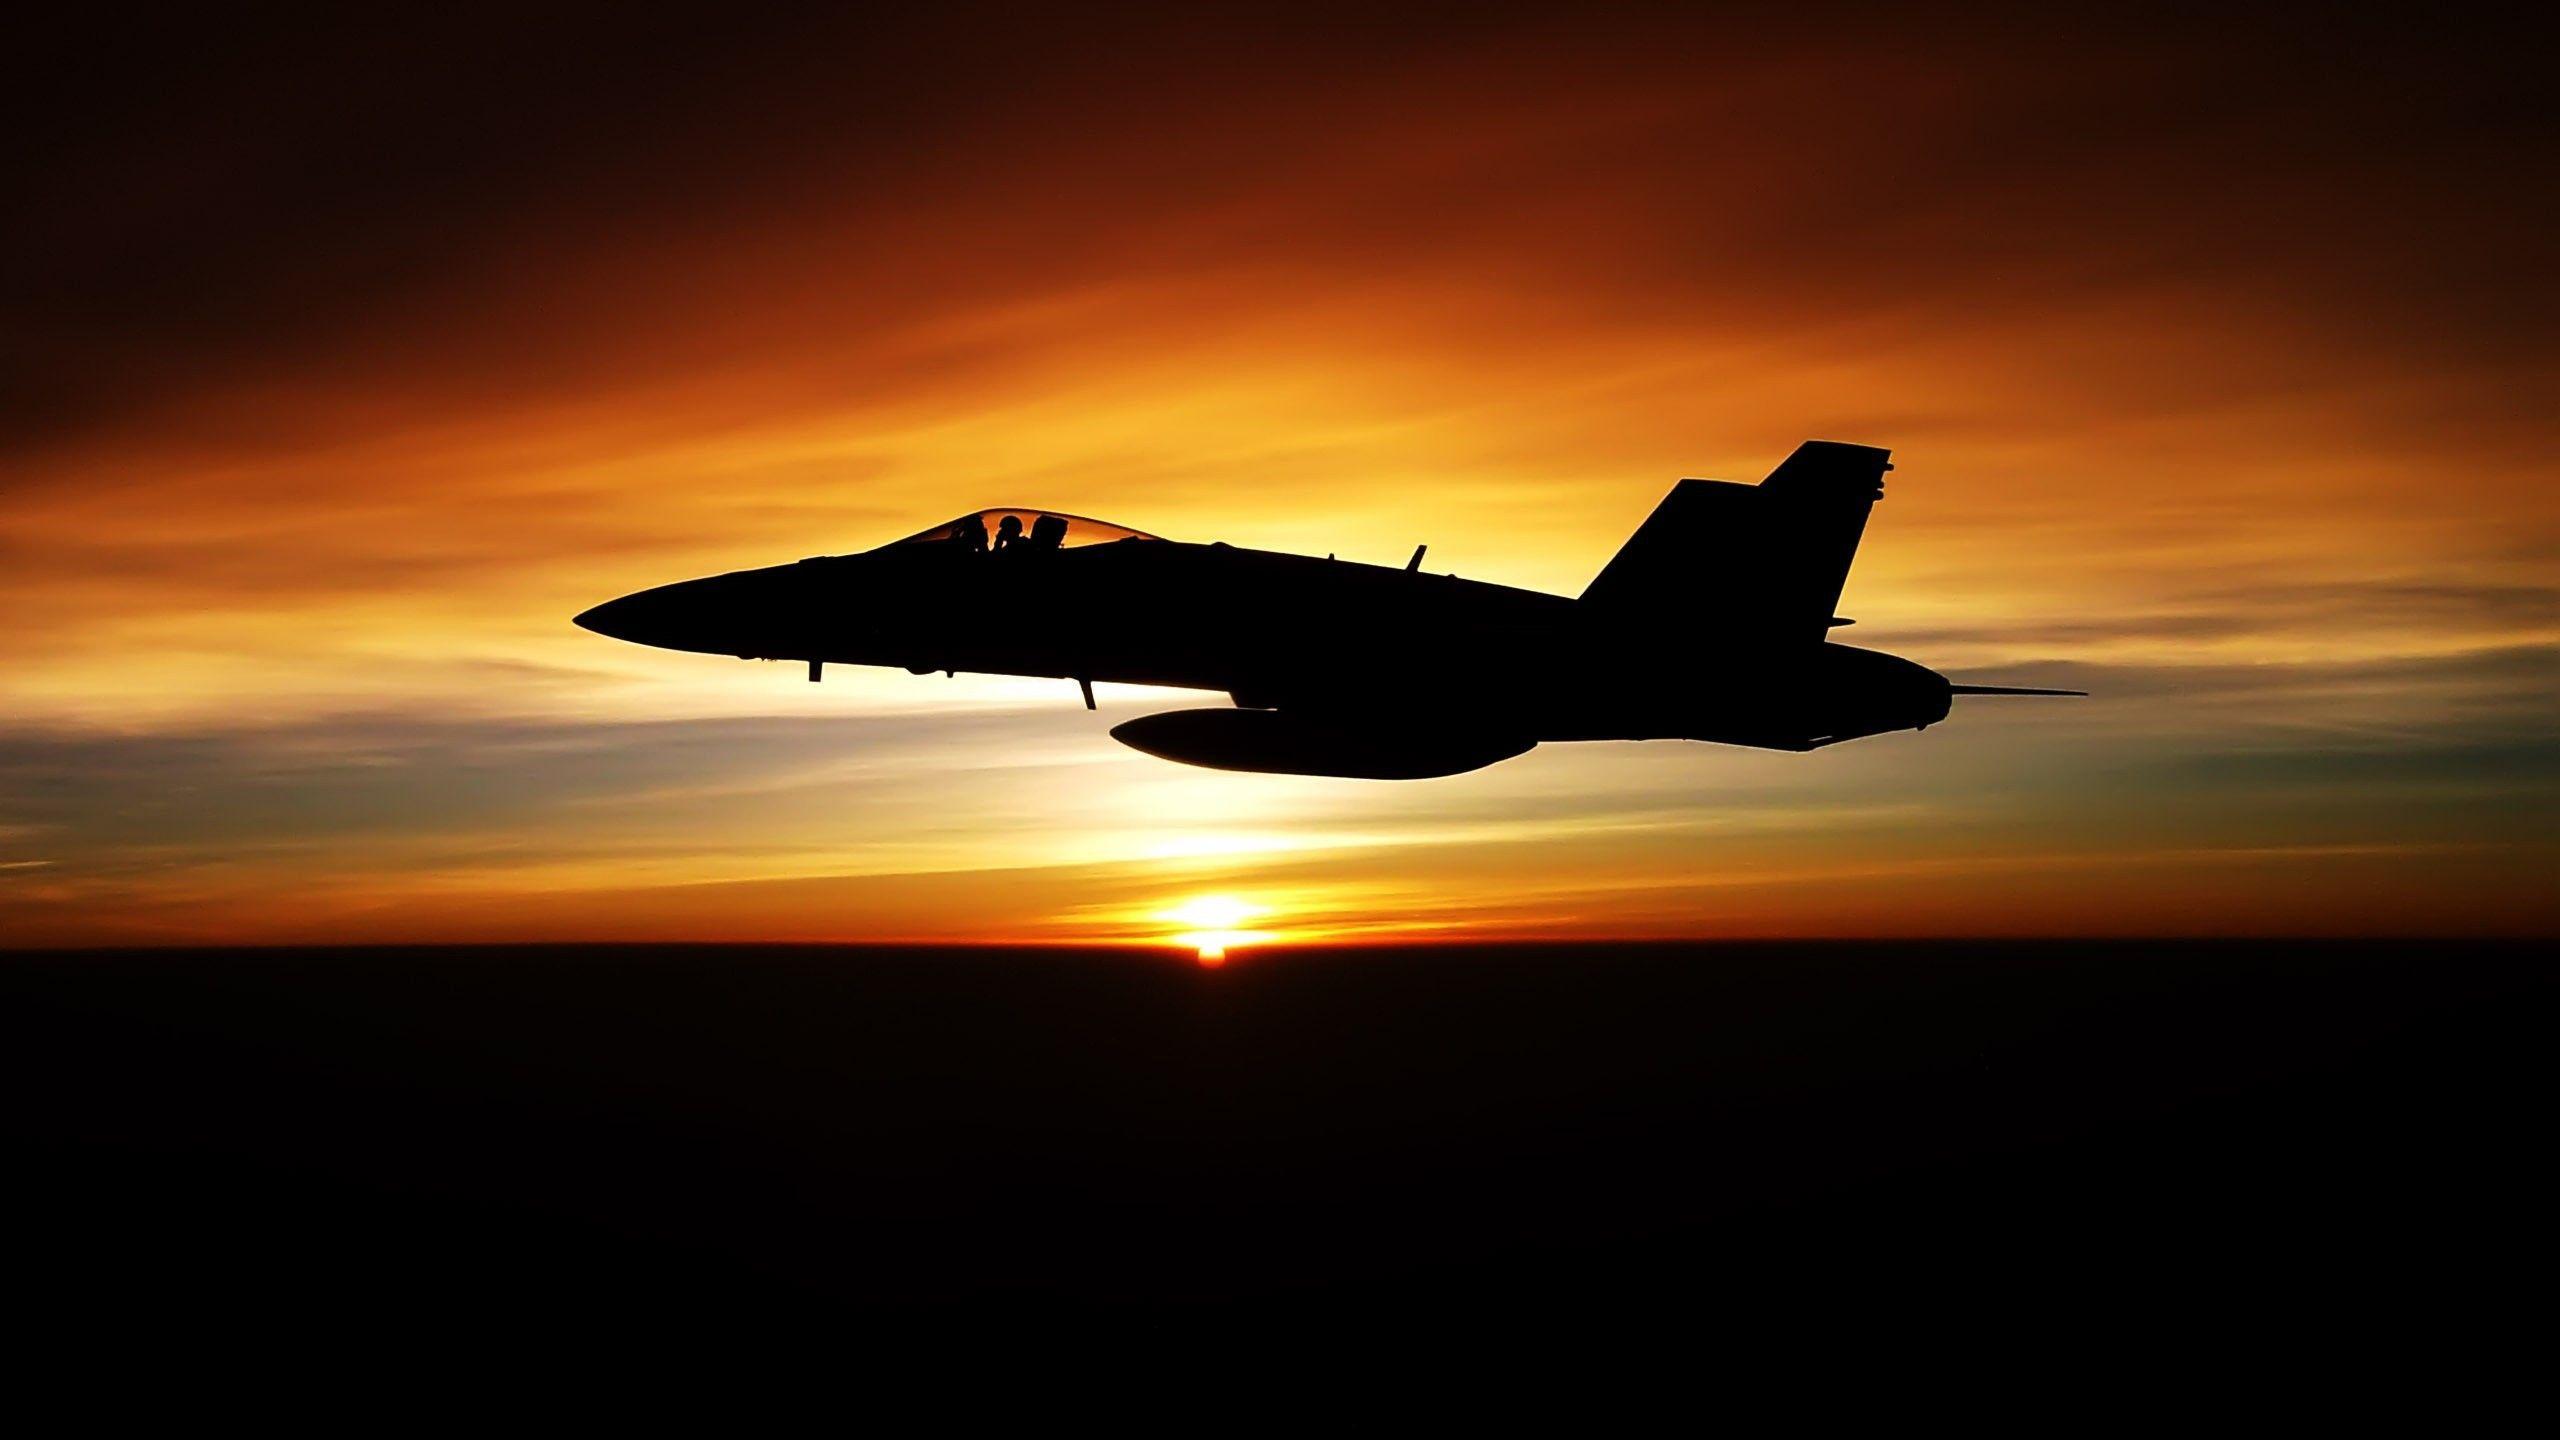 Us Military Air Force Wallpapers Top Free Us Military Air Force